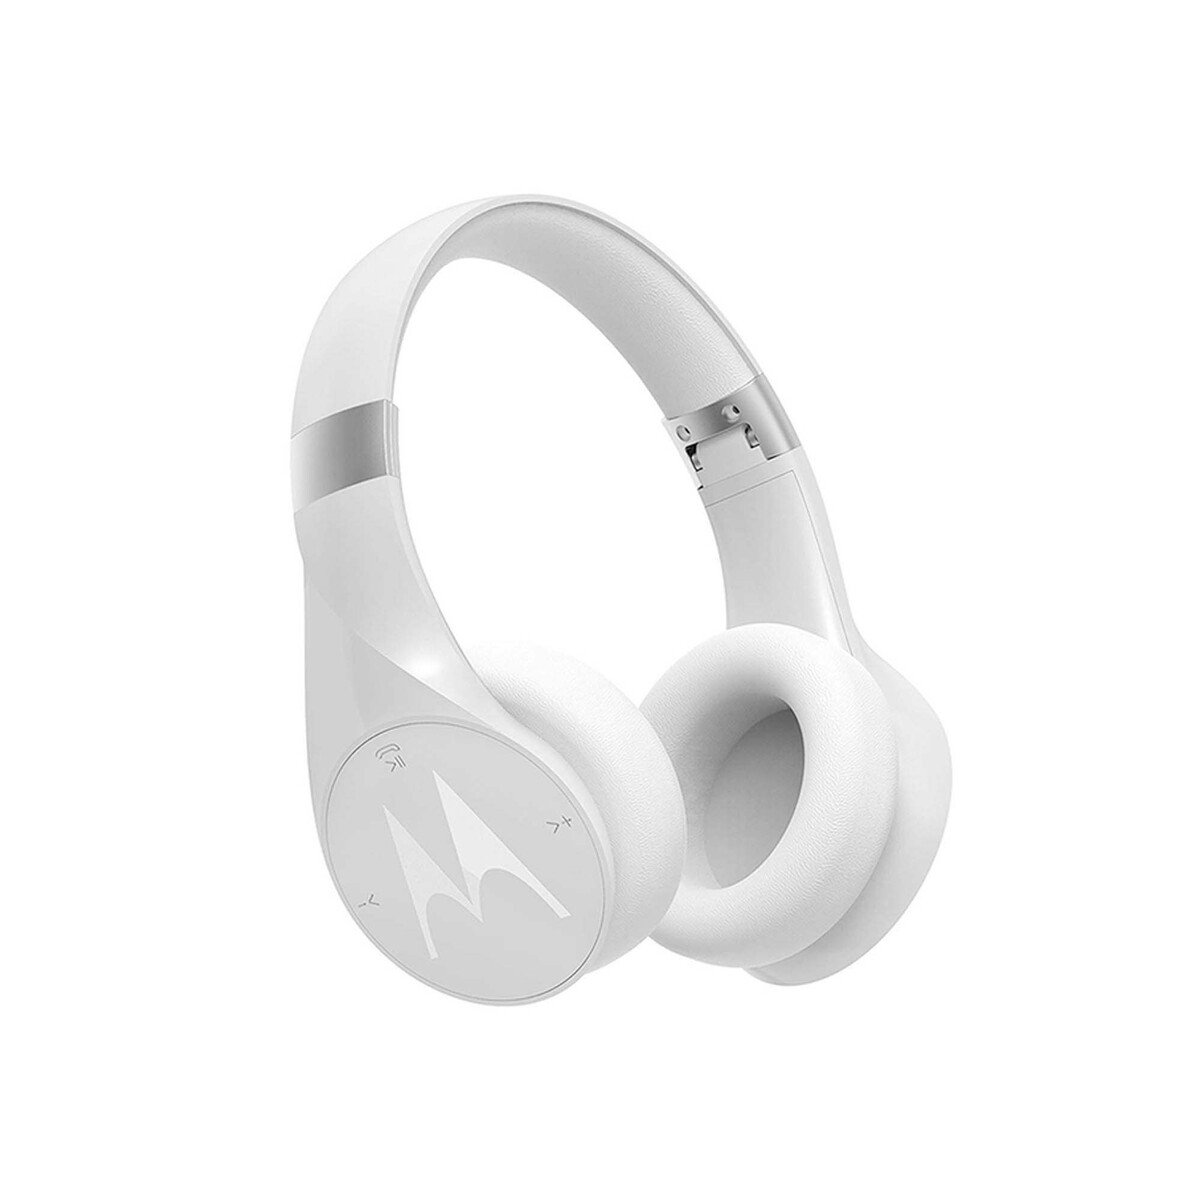 Motorola Pulse Escape+ Wireless Bluetooth Over-Ear Noise Cancelling Headphones with Mic,White